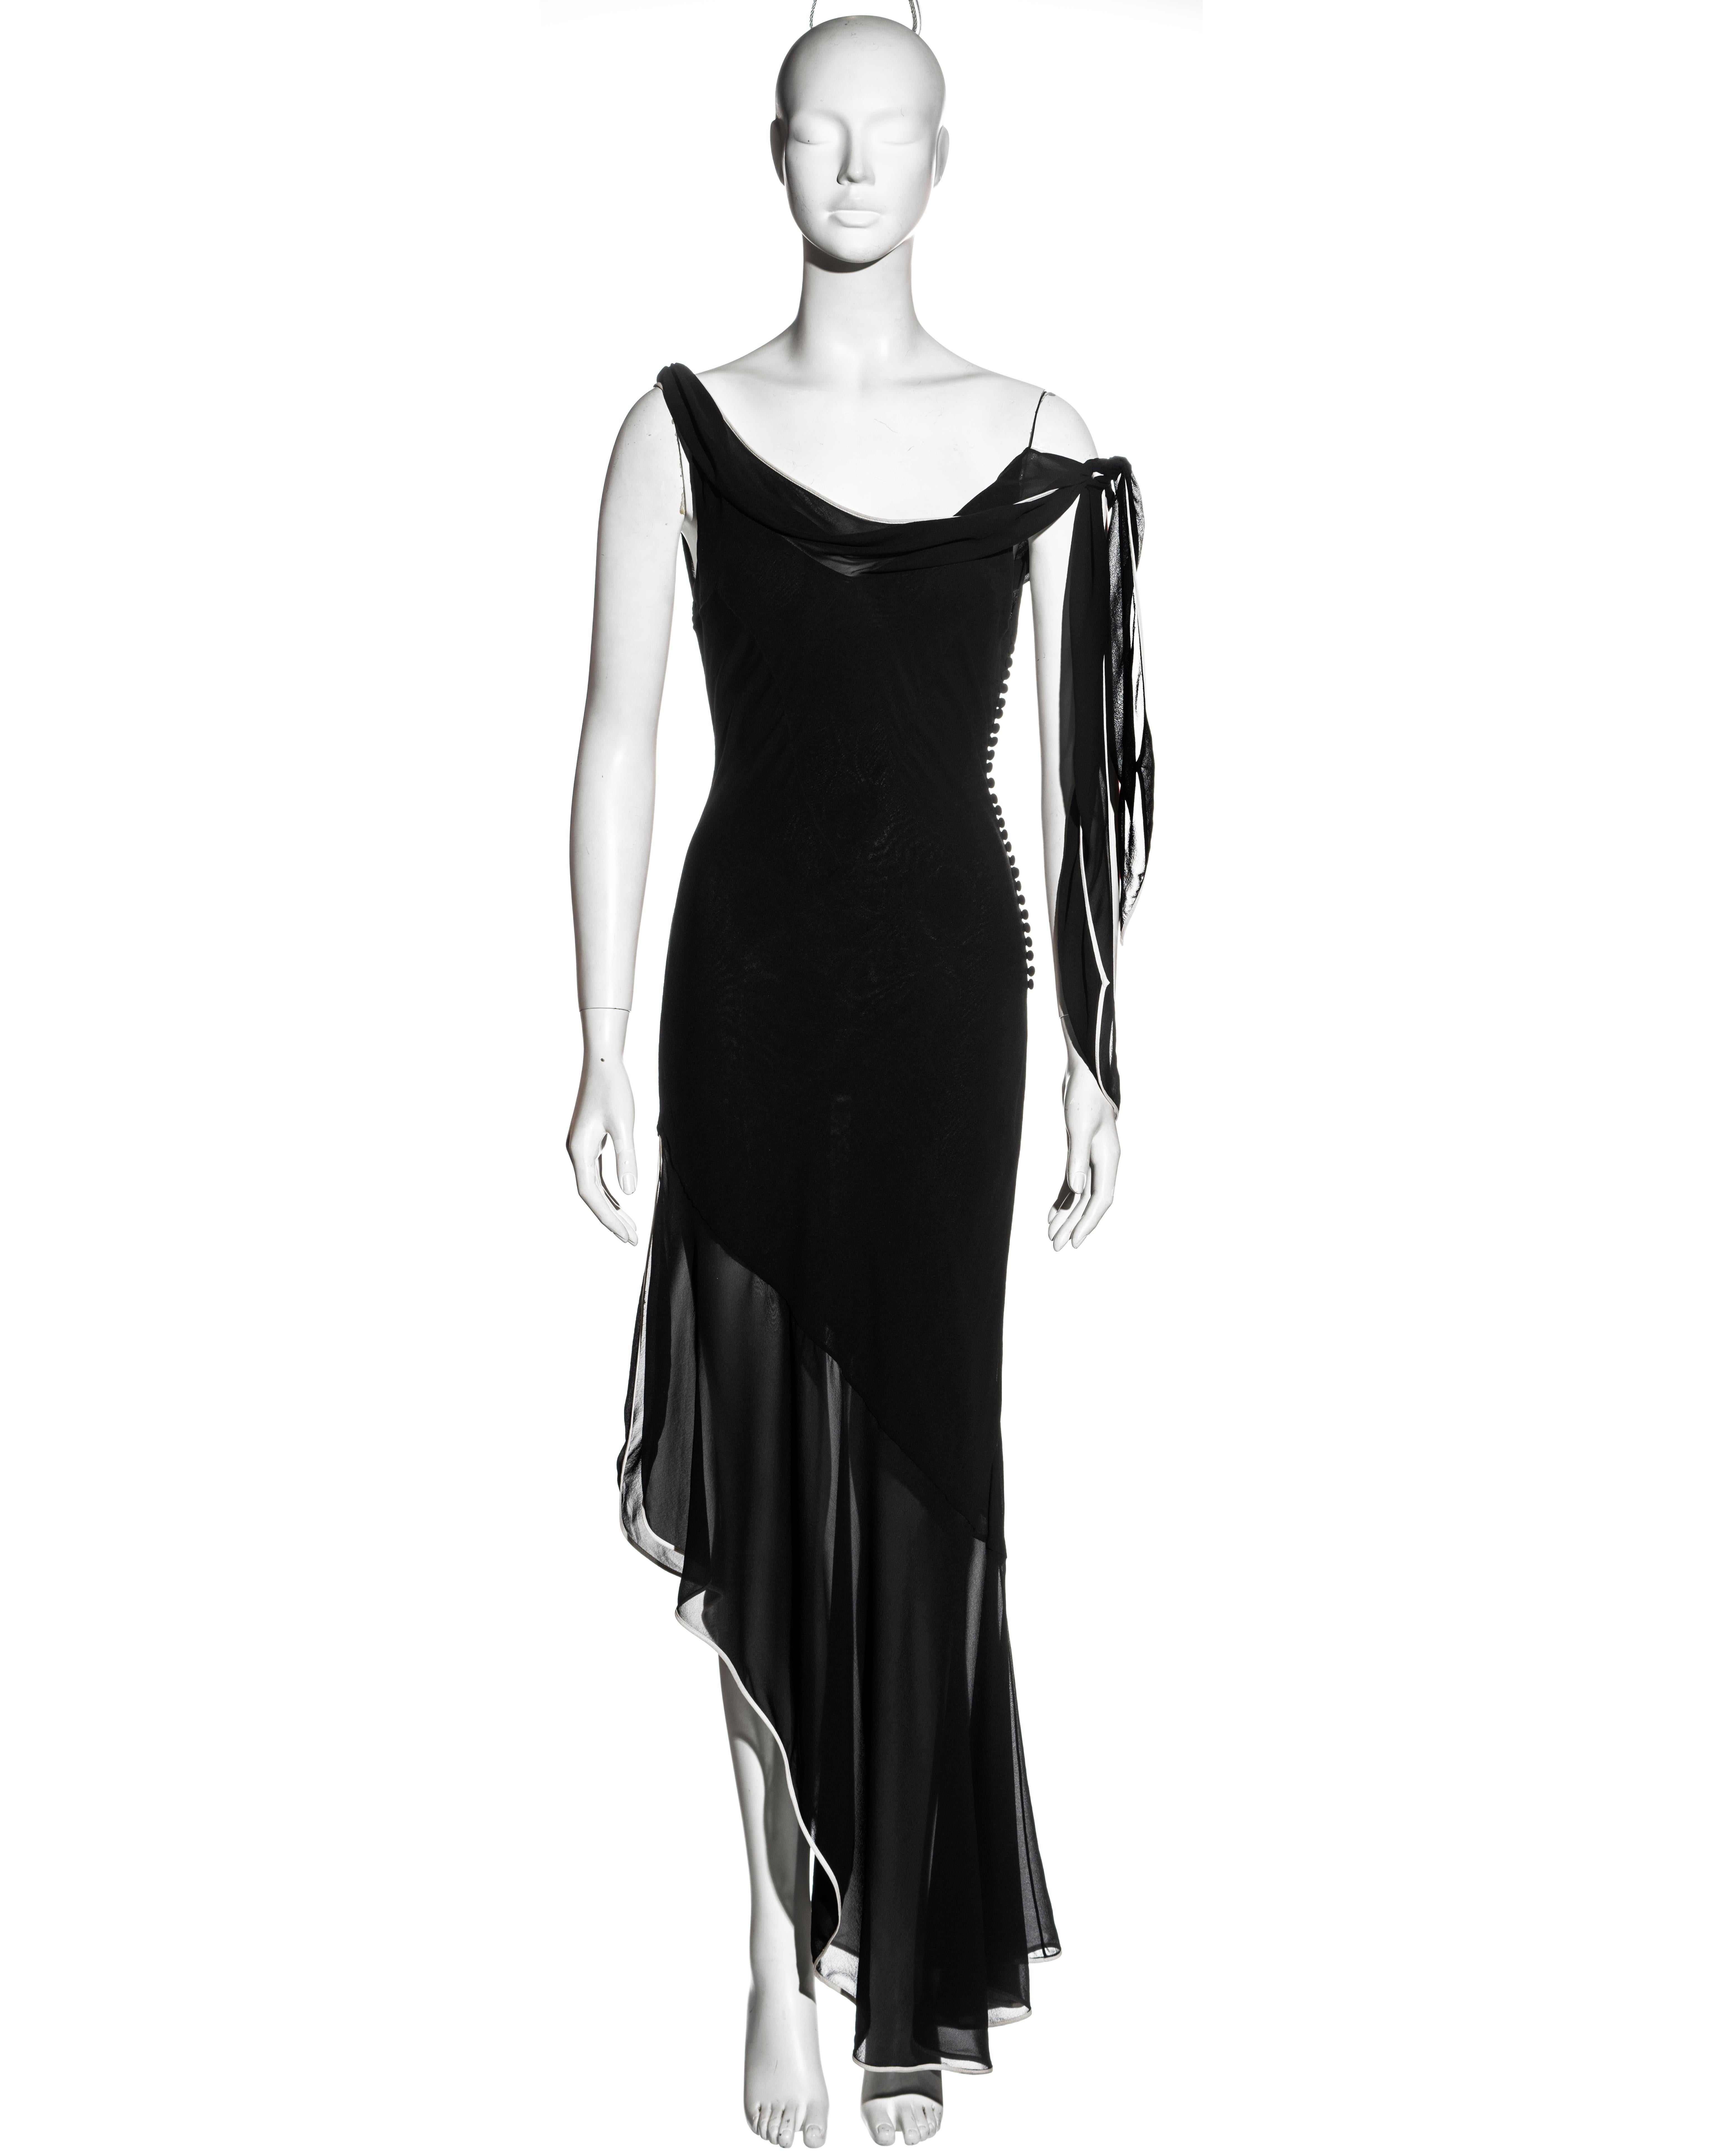 ▪ Christian Dior black silk evening dress
▪ Designed by John Galliano
▪ Cowl neckline with long ties to the shoulder
▪ Spaghetti straps
▪ Bias-cut
▪ White trim
▪ Asymmetric hemline with thigh-high leg slit
▪ Fabric buttons at the side opening
▪ FR